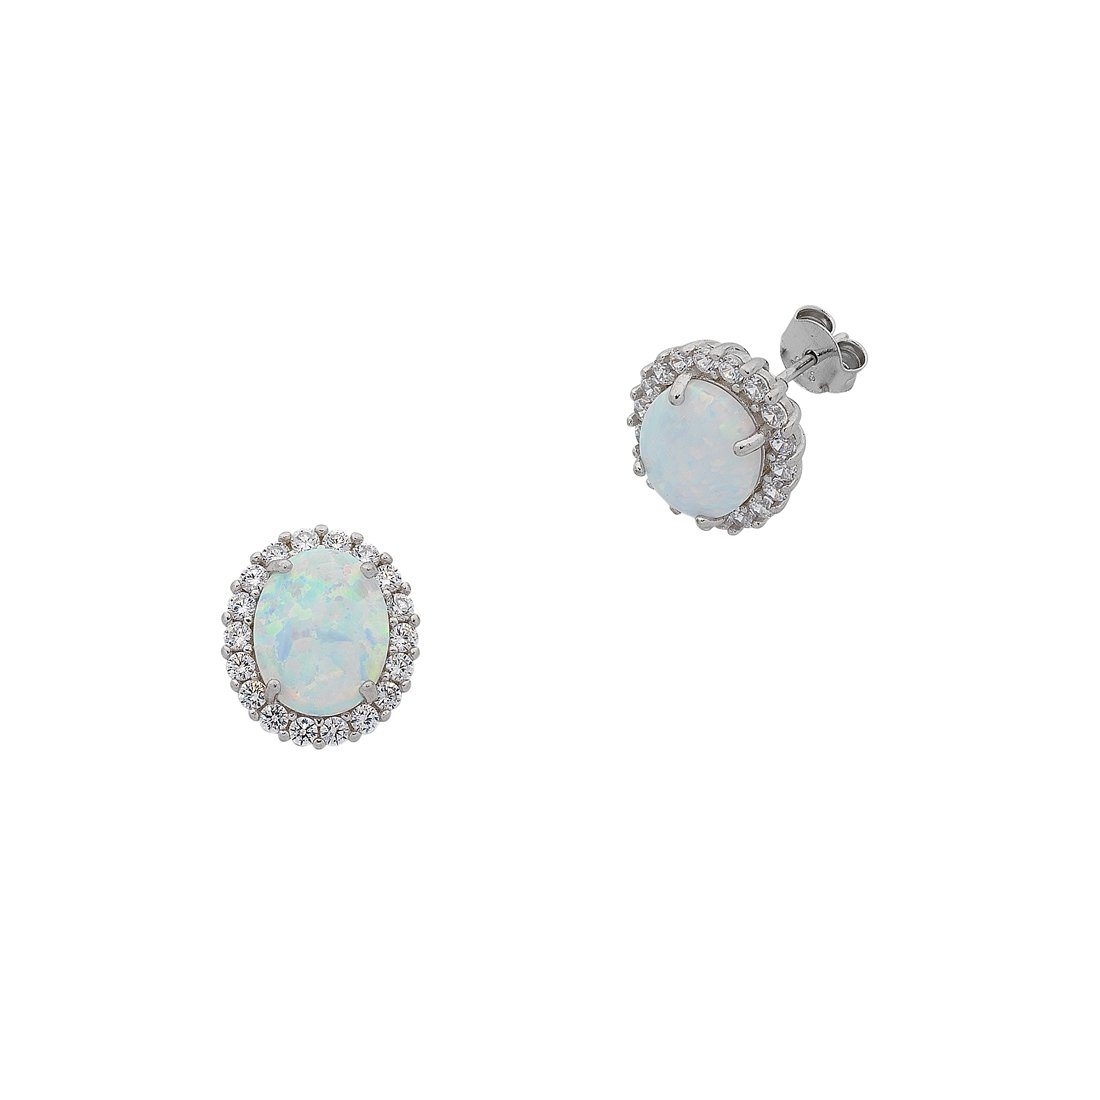 October Birthstone Sterling Silver Oval Synthetic Opal and Cubic Zirconia Earrings Earrings Bevilles 